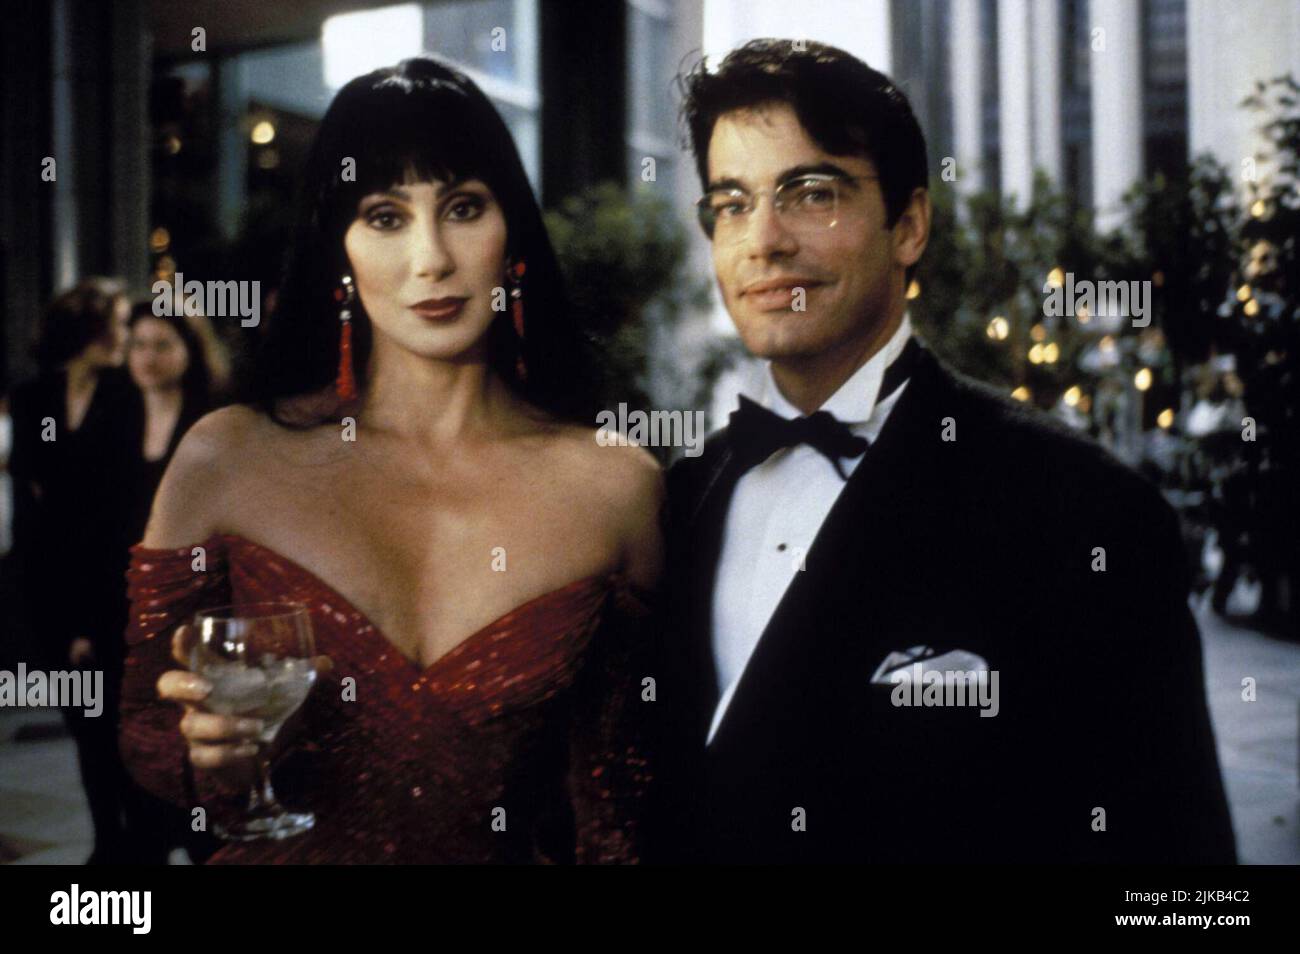 PETER GALLAGHER and CHER in THE PLAYER (1992), directed by ROBERT ALTMAN. Credit: SPELLING FILMS INTERNATIONAL / Album Stock Photo